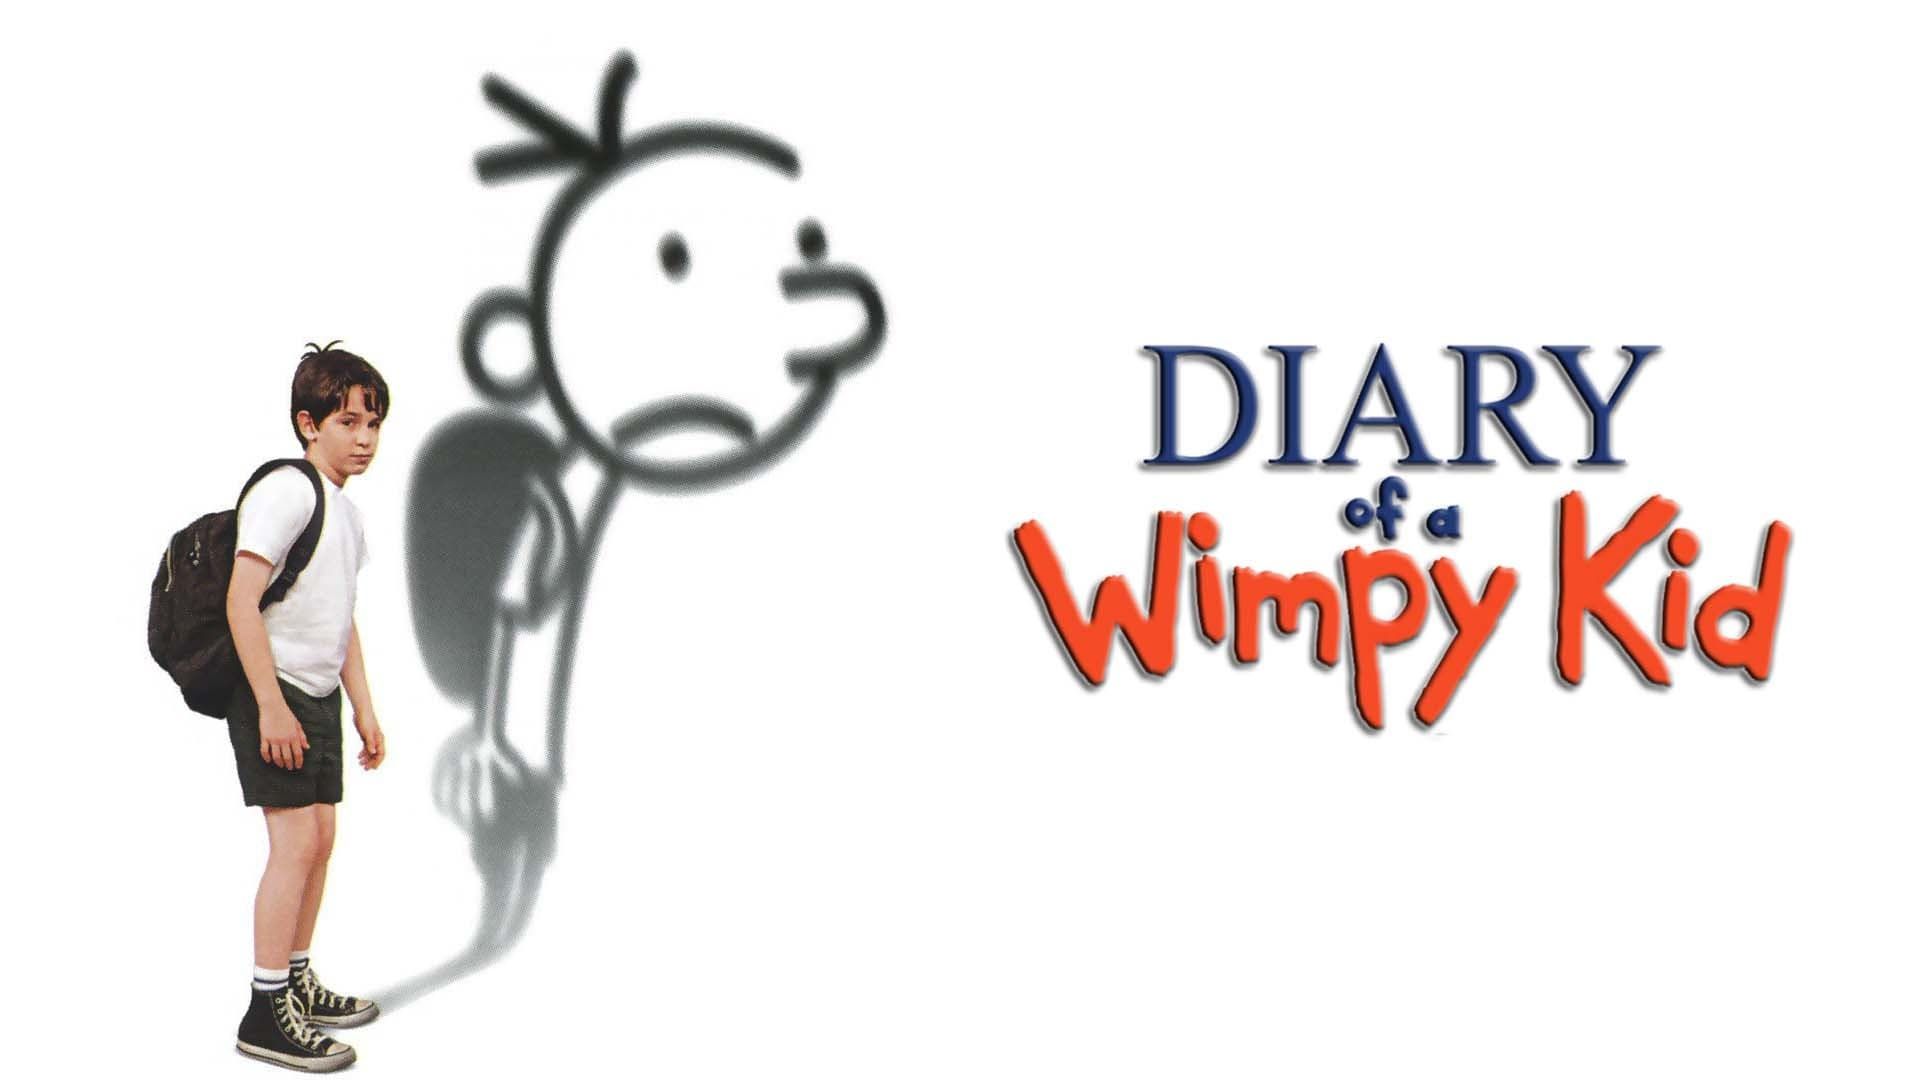 Diary of a Wimpy Kid (2010) on Disney+ or Streaming Online